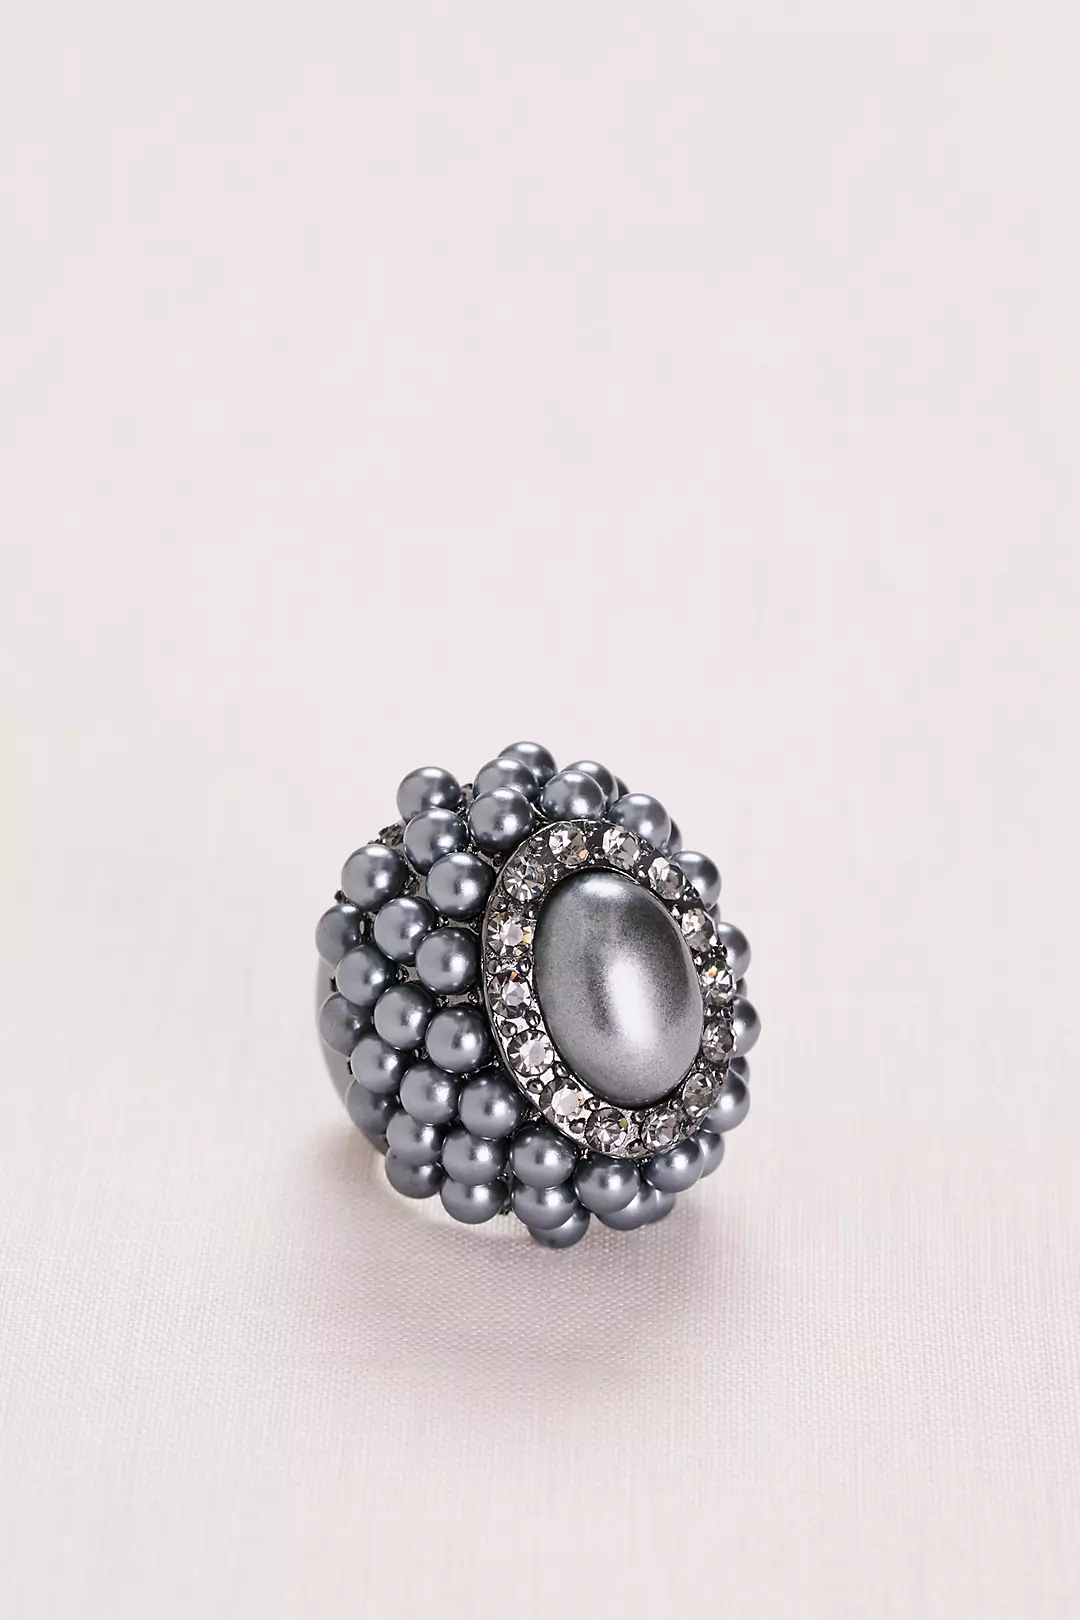 Midnight Pearl and Pave Cluster Ring Image